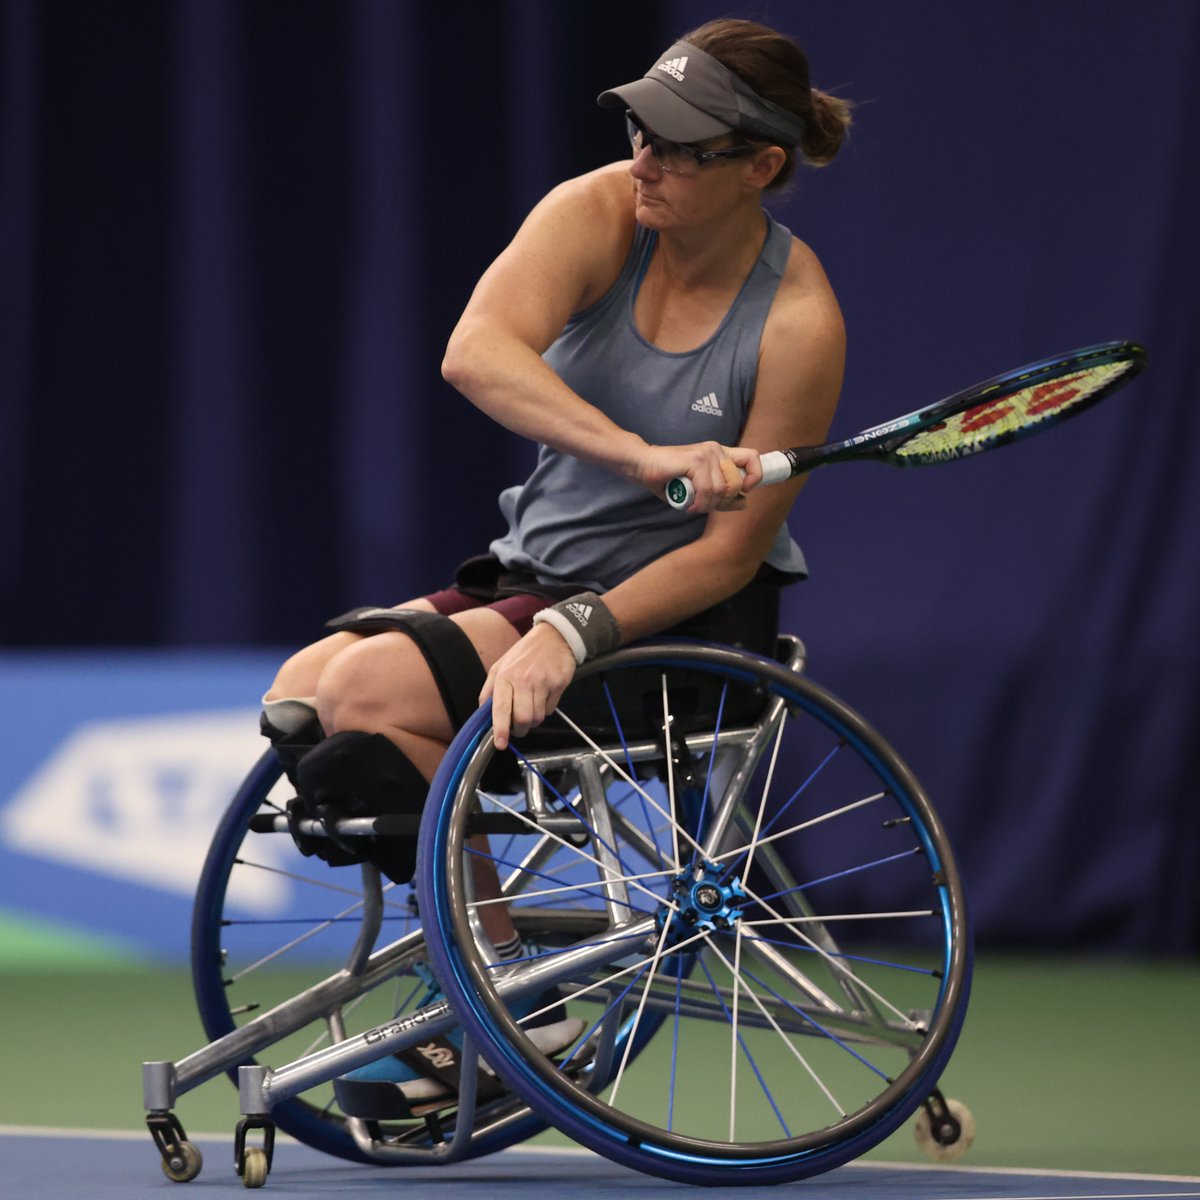 Into tomorrow's women's doubles FINAL after a thriller 💪 @lucy_shuker & @CorneliaTennis edge Charlotte Fairbank (FRA) & Maayan Zikri (ISR) 4-6, 6-4, (11-9) to reach their 6th final and 2nd Bolton Indoor ITF 2 final together #BackTheBrits 🇬🇧 | #wheelchairtennis | #BoltonIndoor